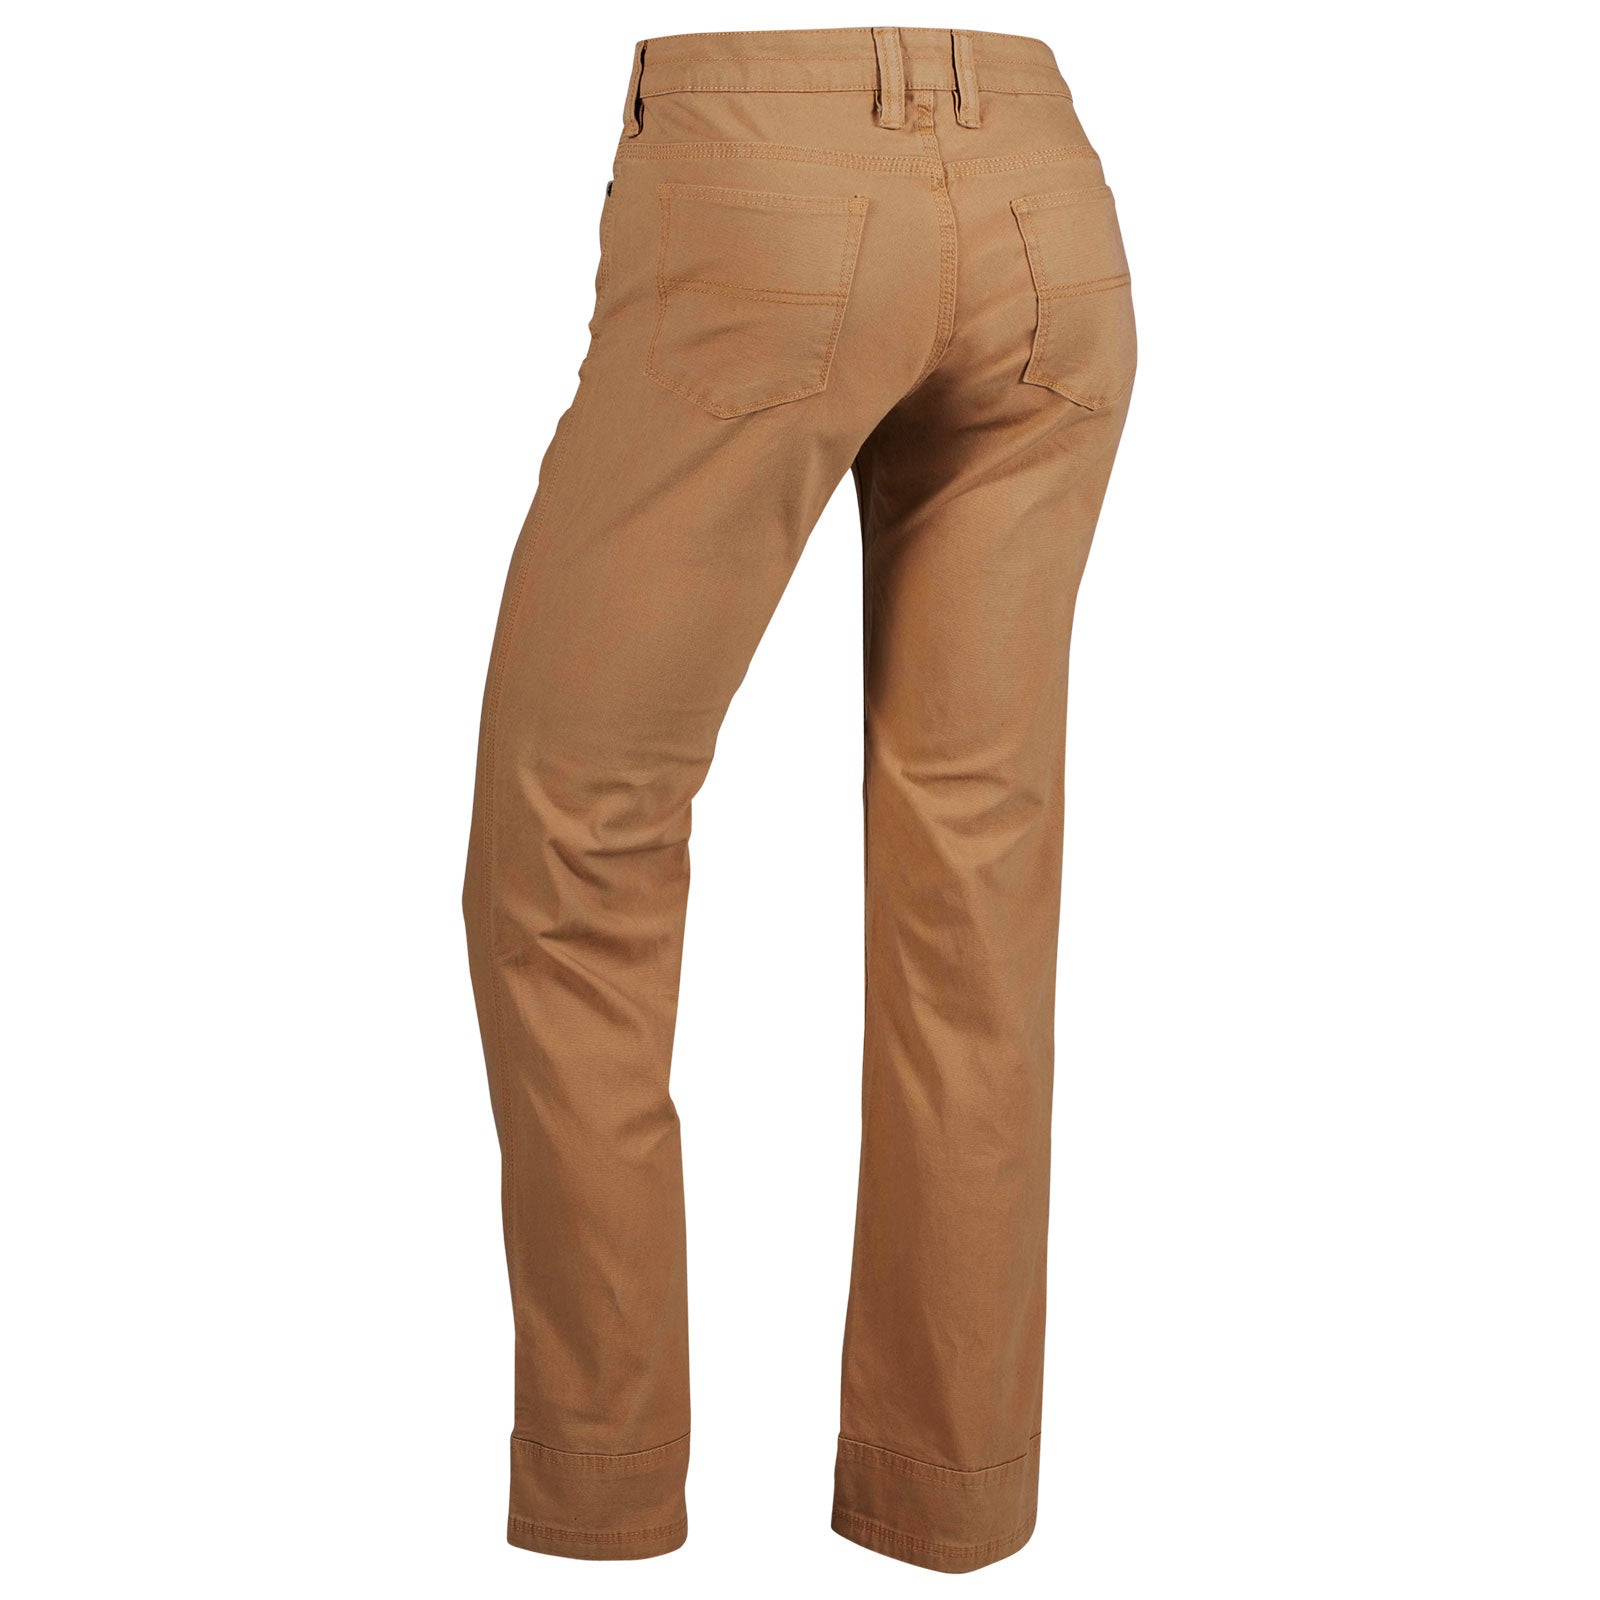 Mountain khaki Women's Camber 106 Lined Pant Classic Fit - Tobacco - Andy  Thornal Company